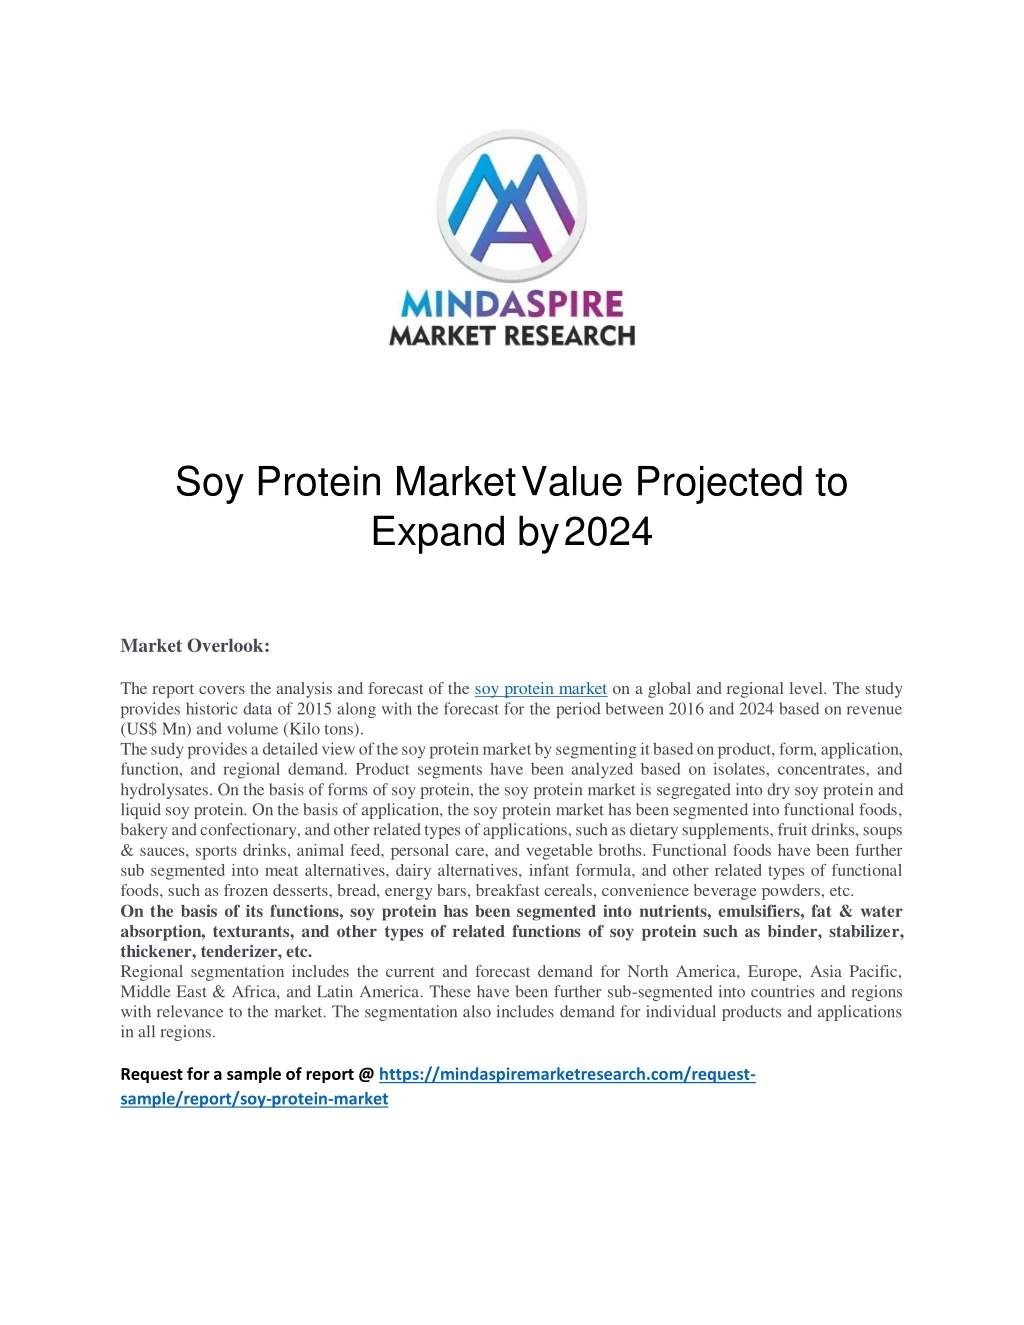 soy protein market value projected to expand